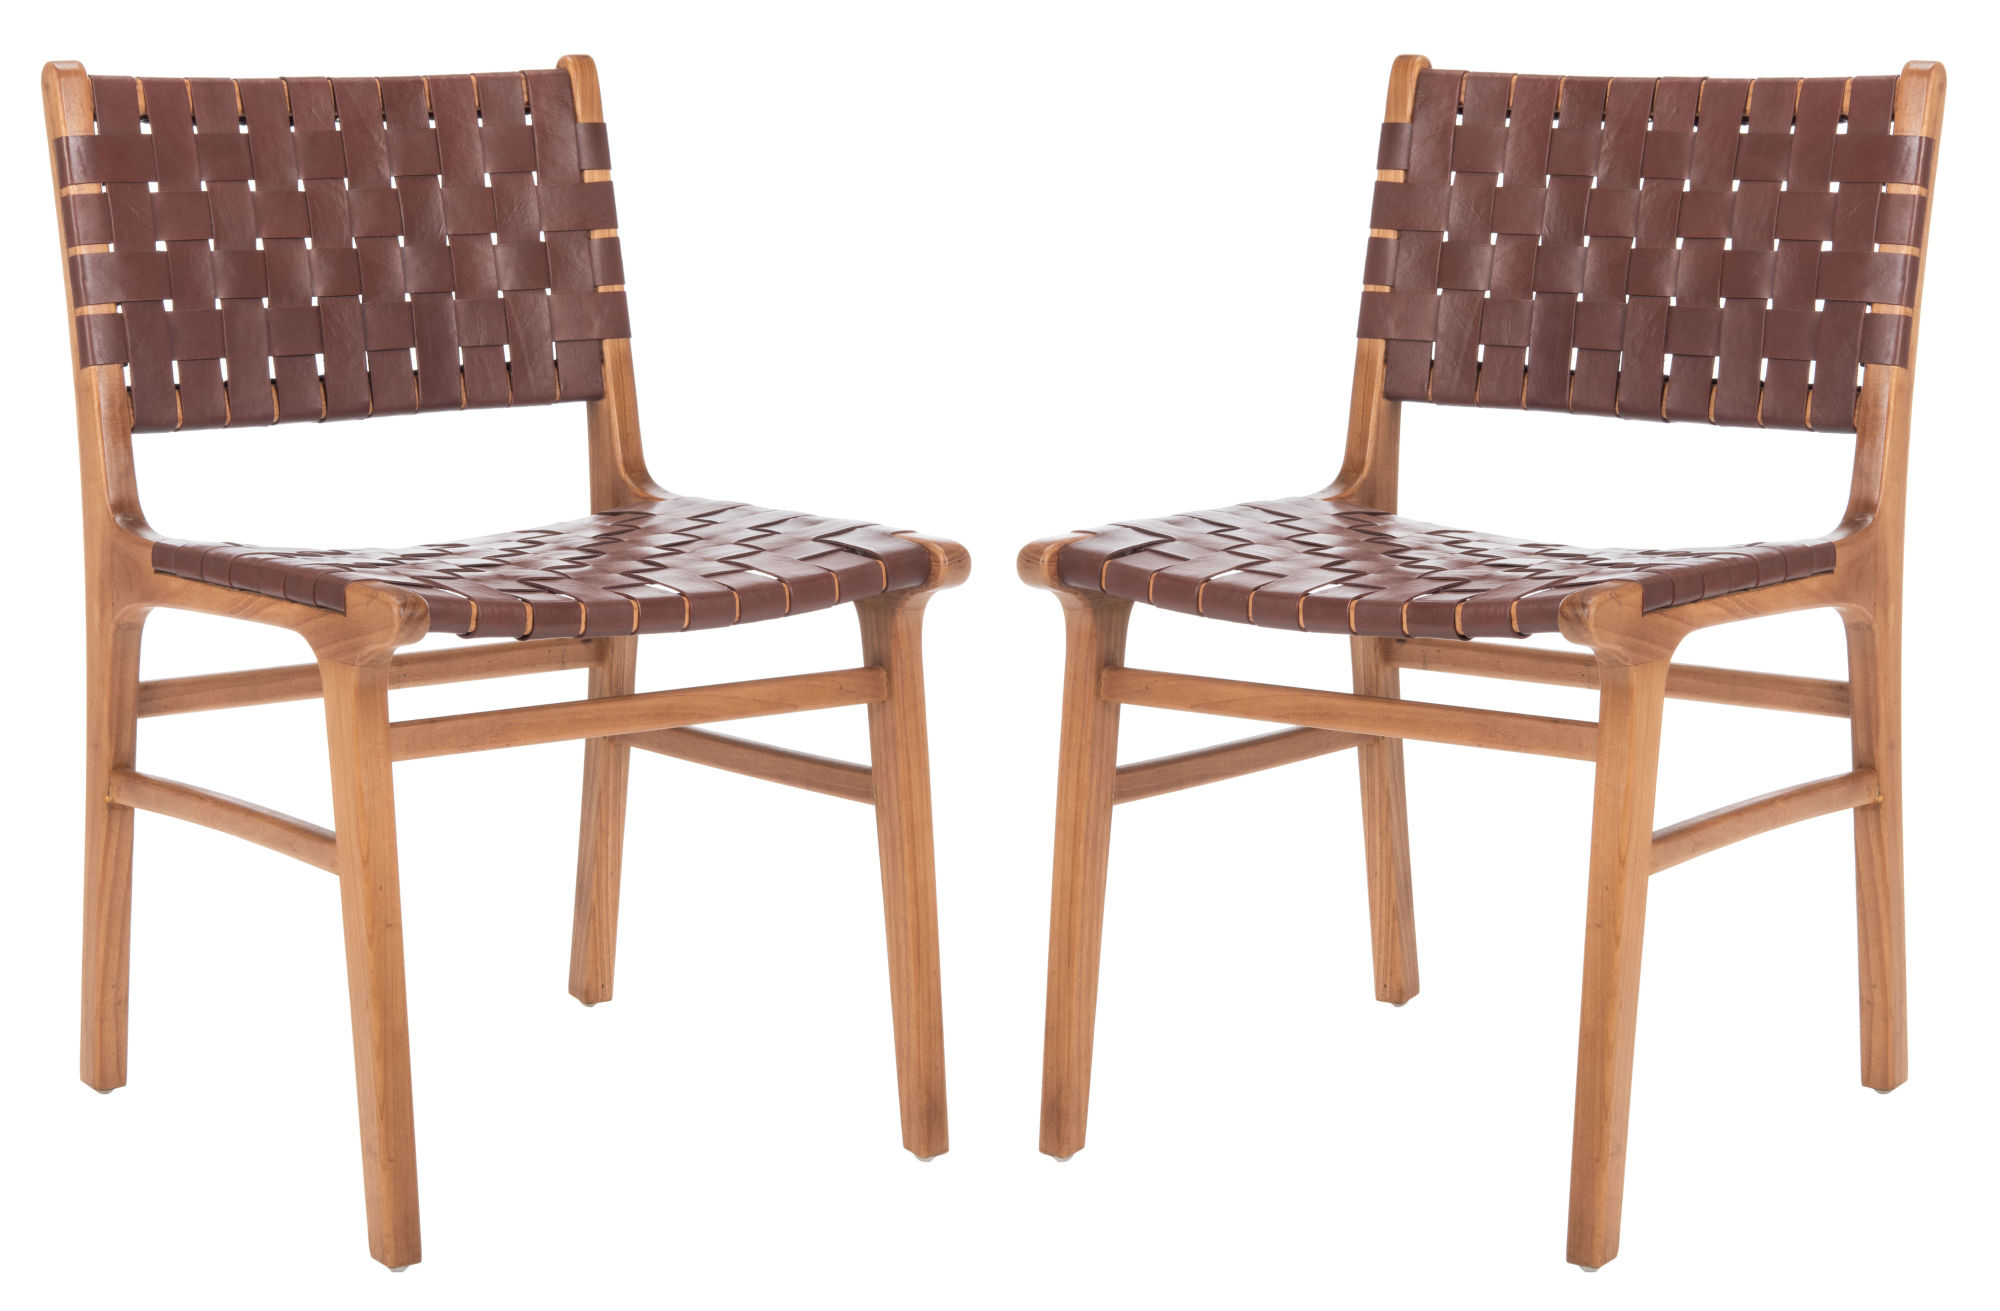 Taika Woven Leather Dining Chair